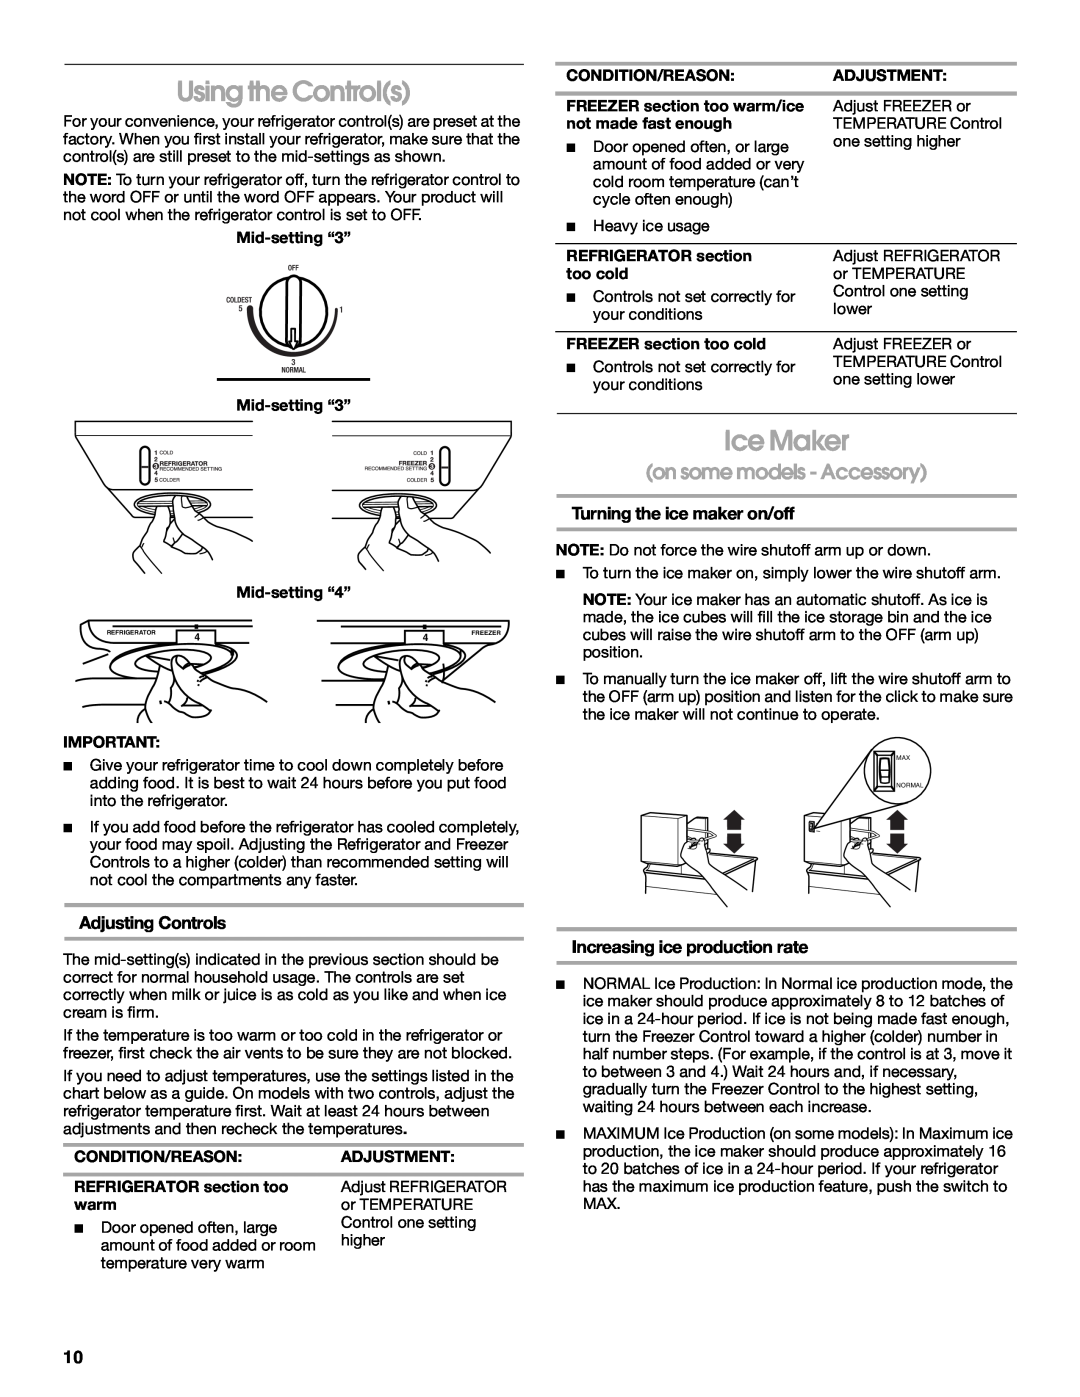 Whirlpool 2225405 manual Using the Controls, Ice Maker, on some models - Accessory, Adjusting Controls 